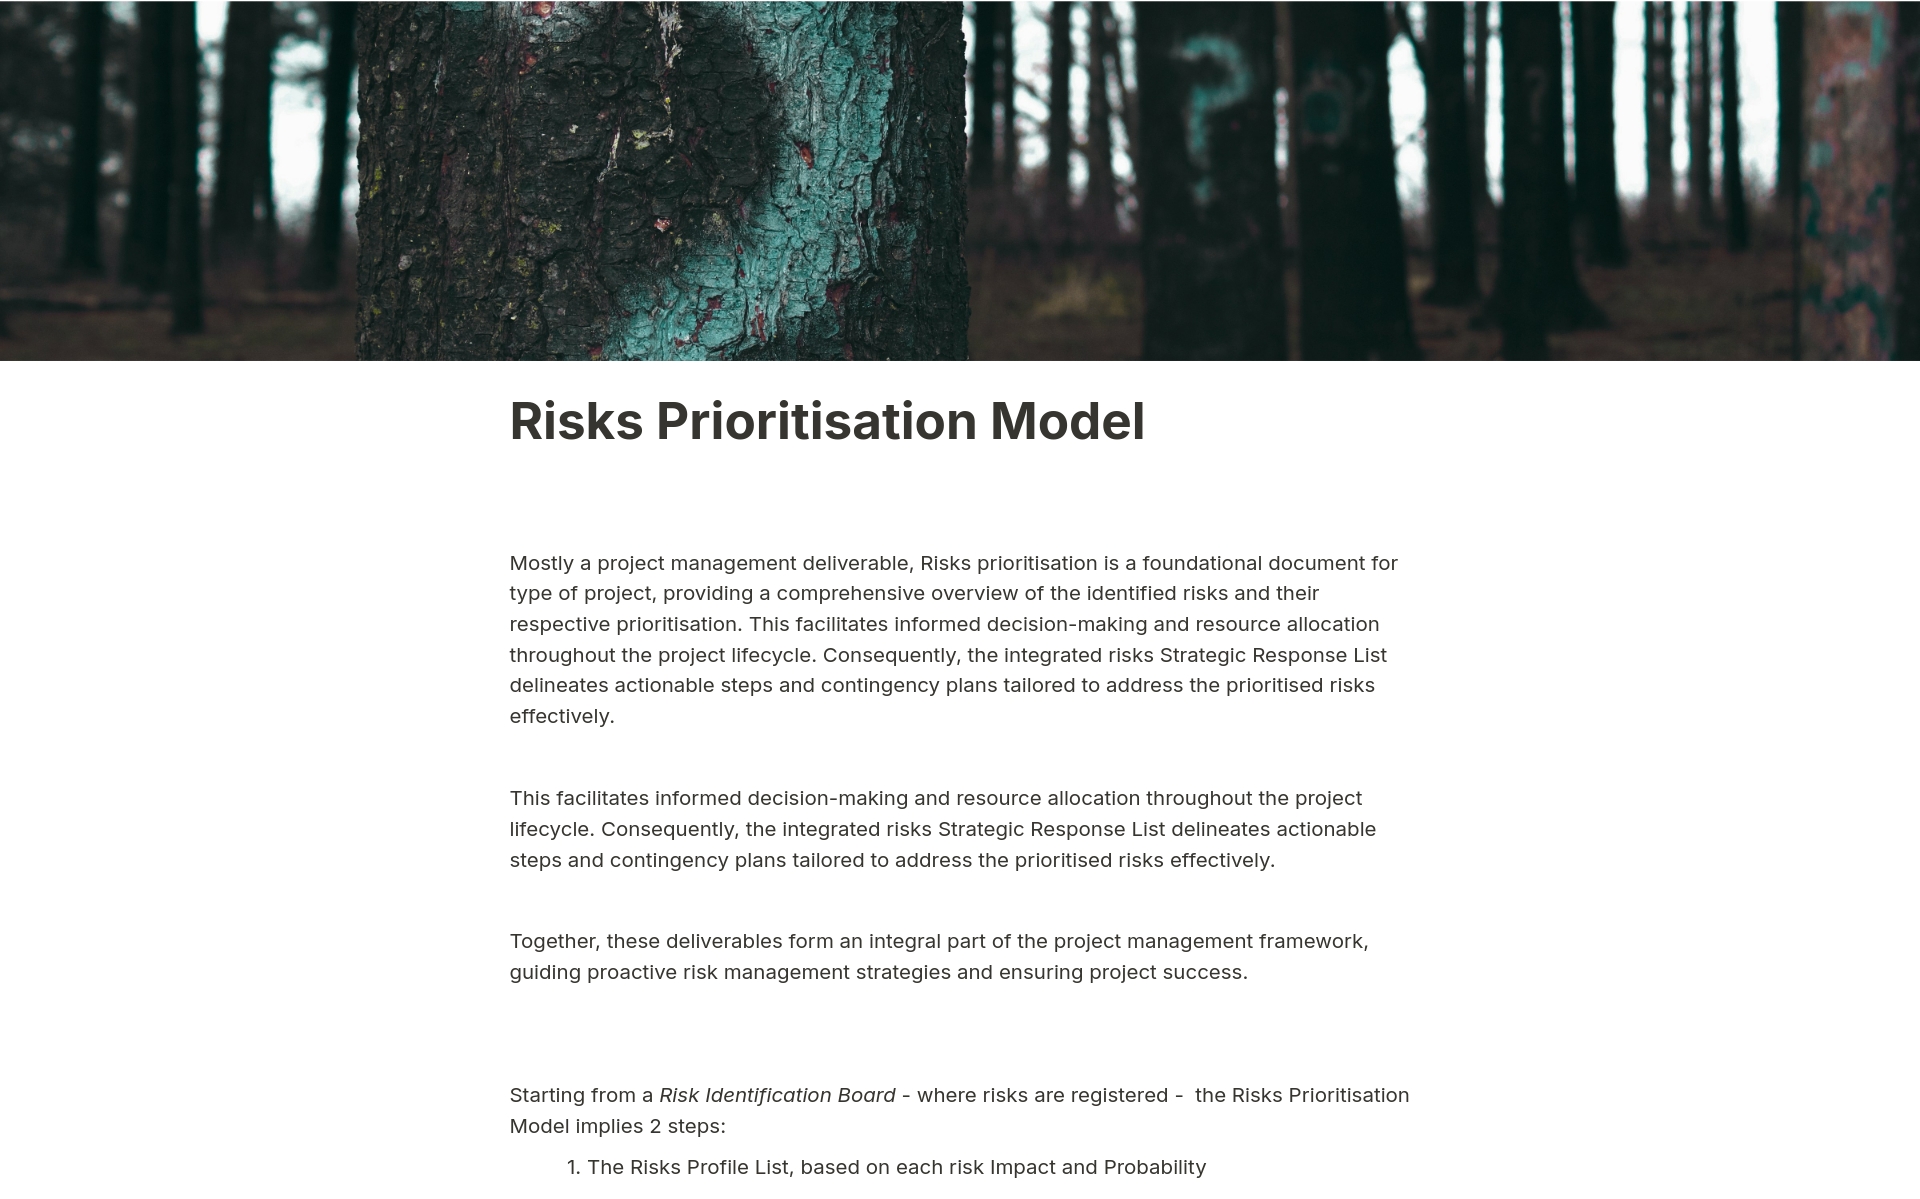 Risks prioritisation is a foundational document for type of project, providing a comprehensive overview of the identified risks and their respective prioritisation. This facilitates informed decision-making and resource allocation throughout the project lifecycle. Consequently, t